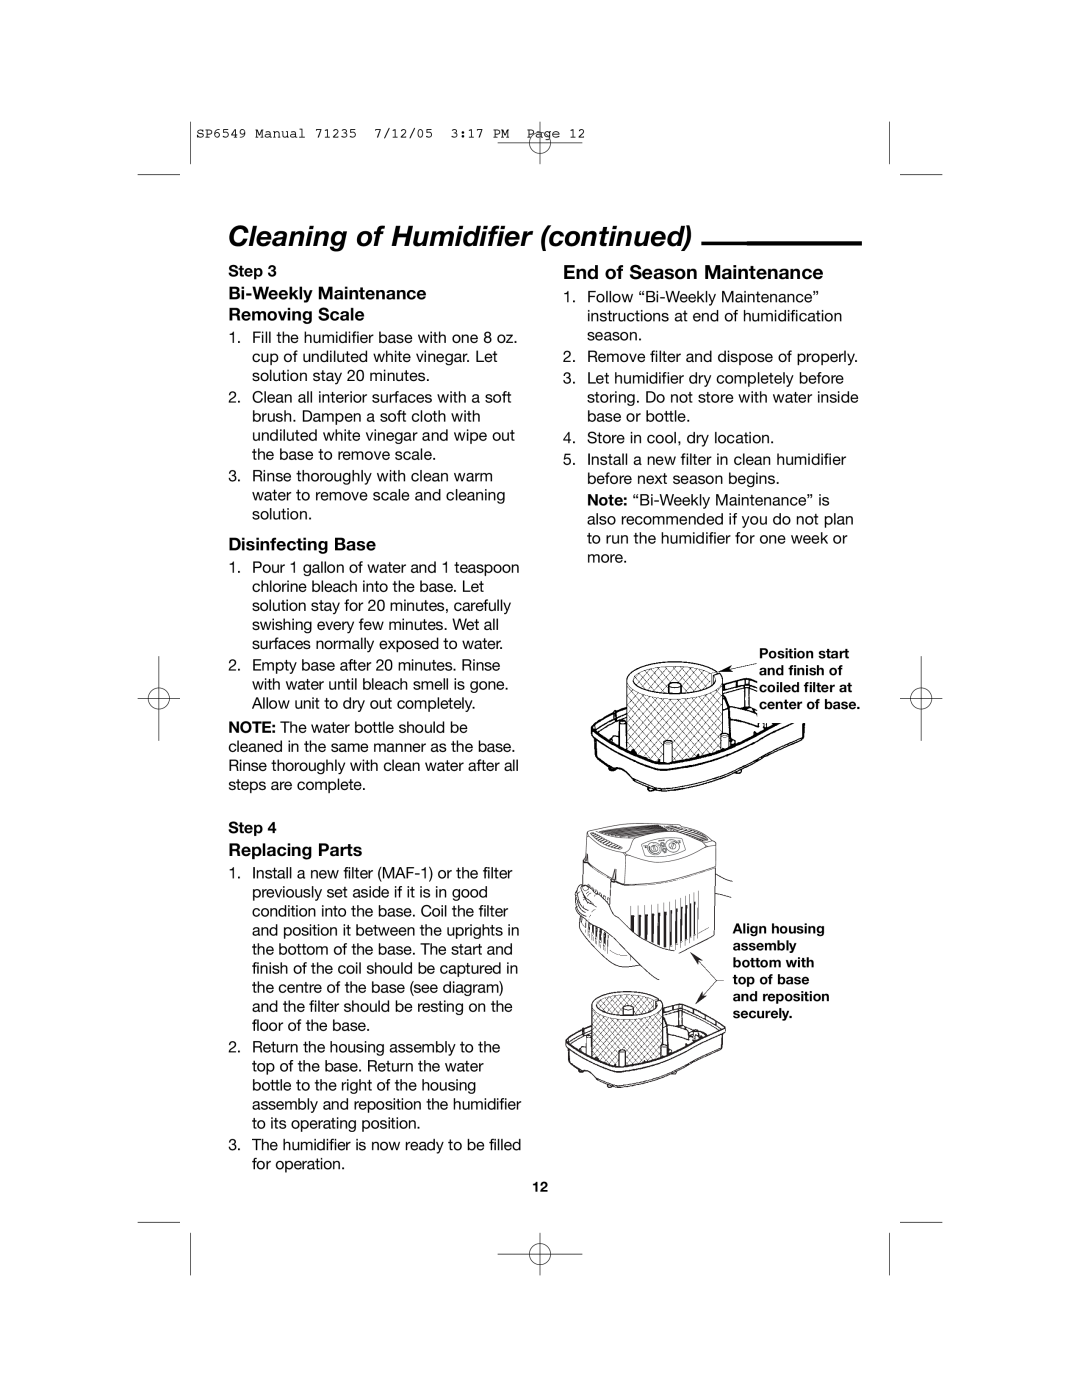 MoistAir MA 0950 owner manual Cleaning of Humidifier continued, End of Season Maintenance 